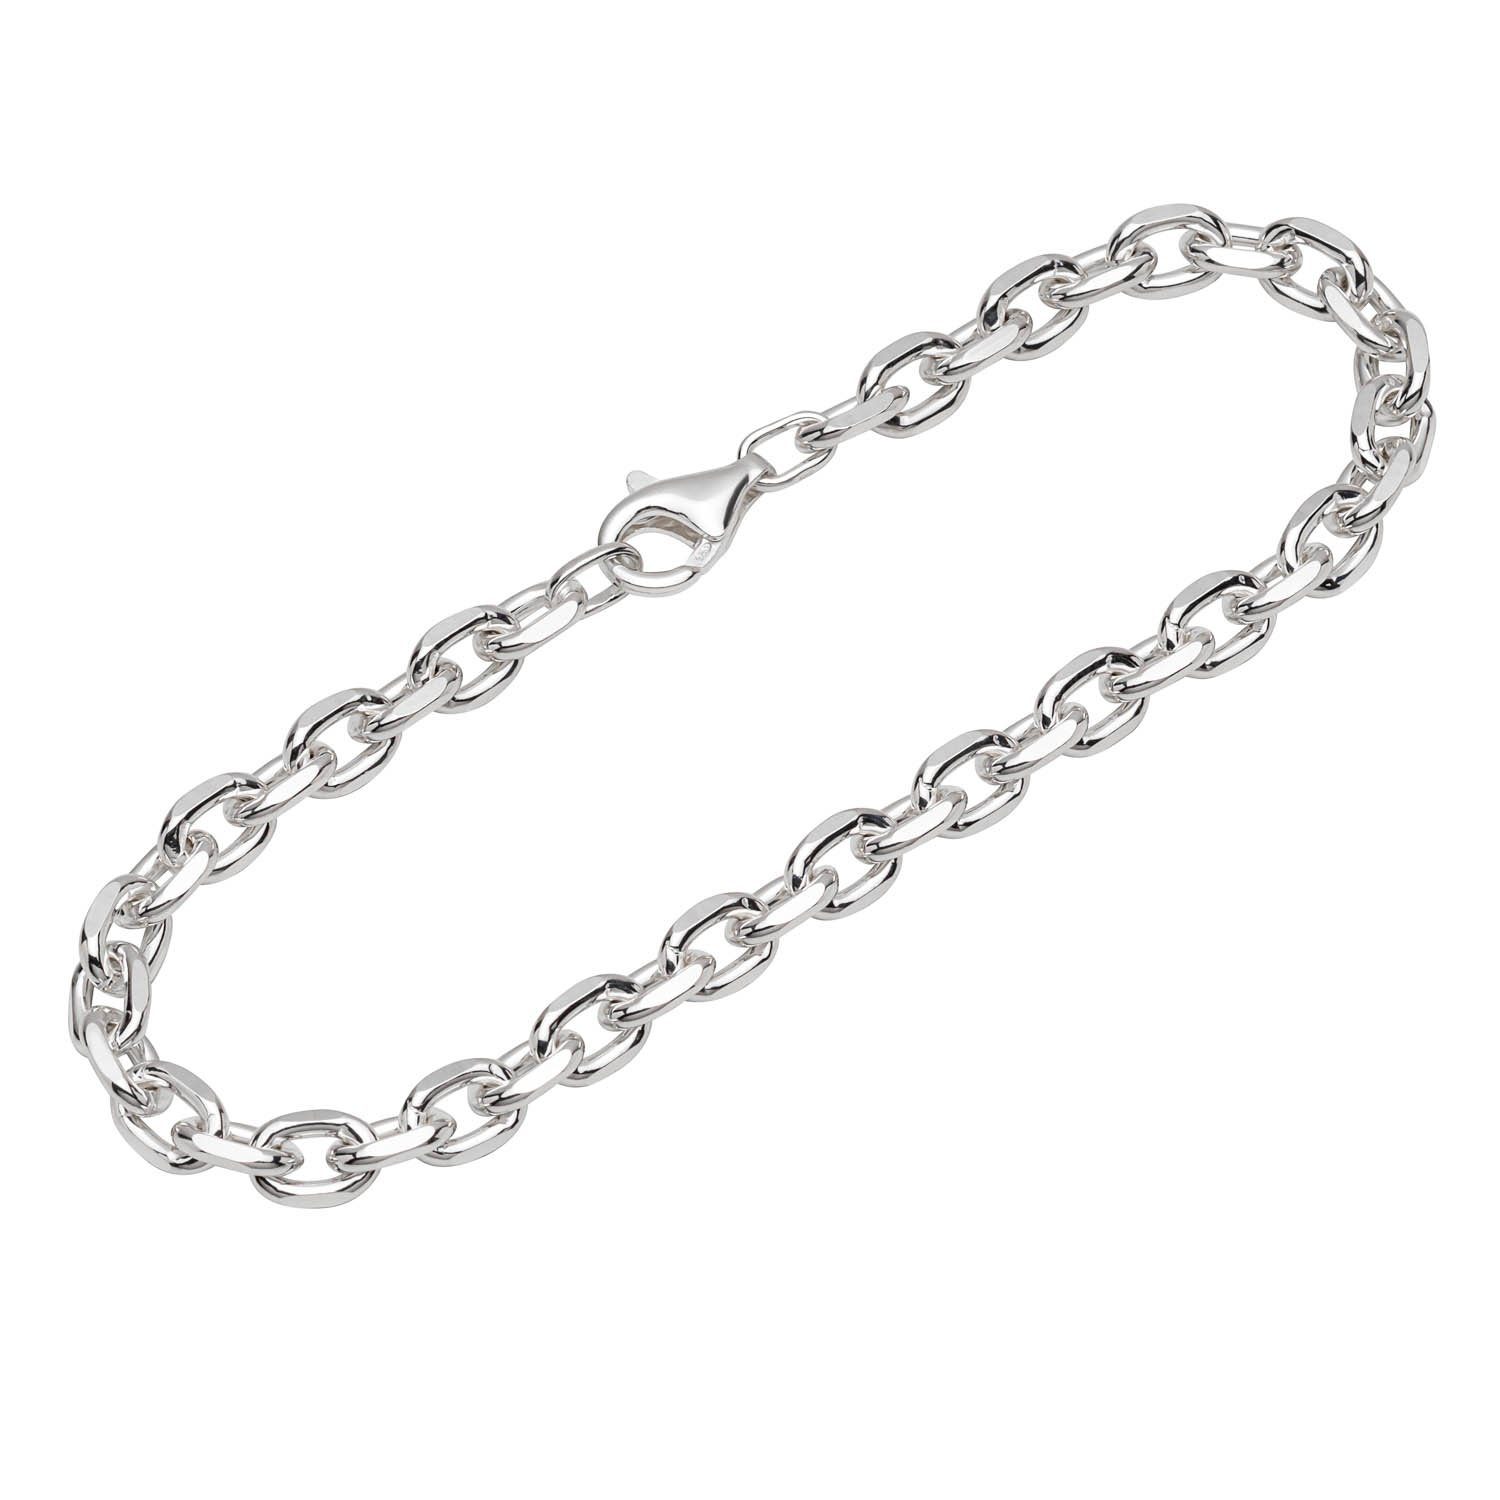 Stück), 925 4 Armband Germany Silber Sterling Made Silberarmband fach in Ankerkette (1 22cm NKlaus